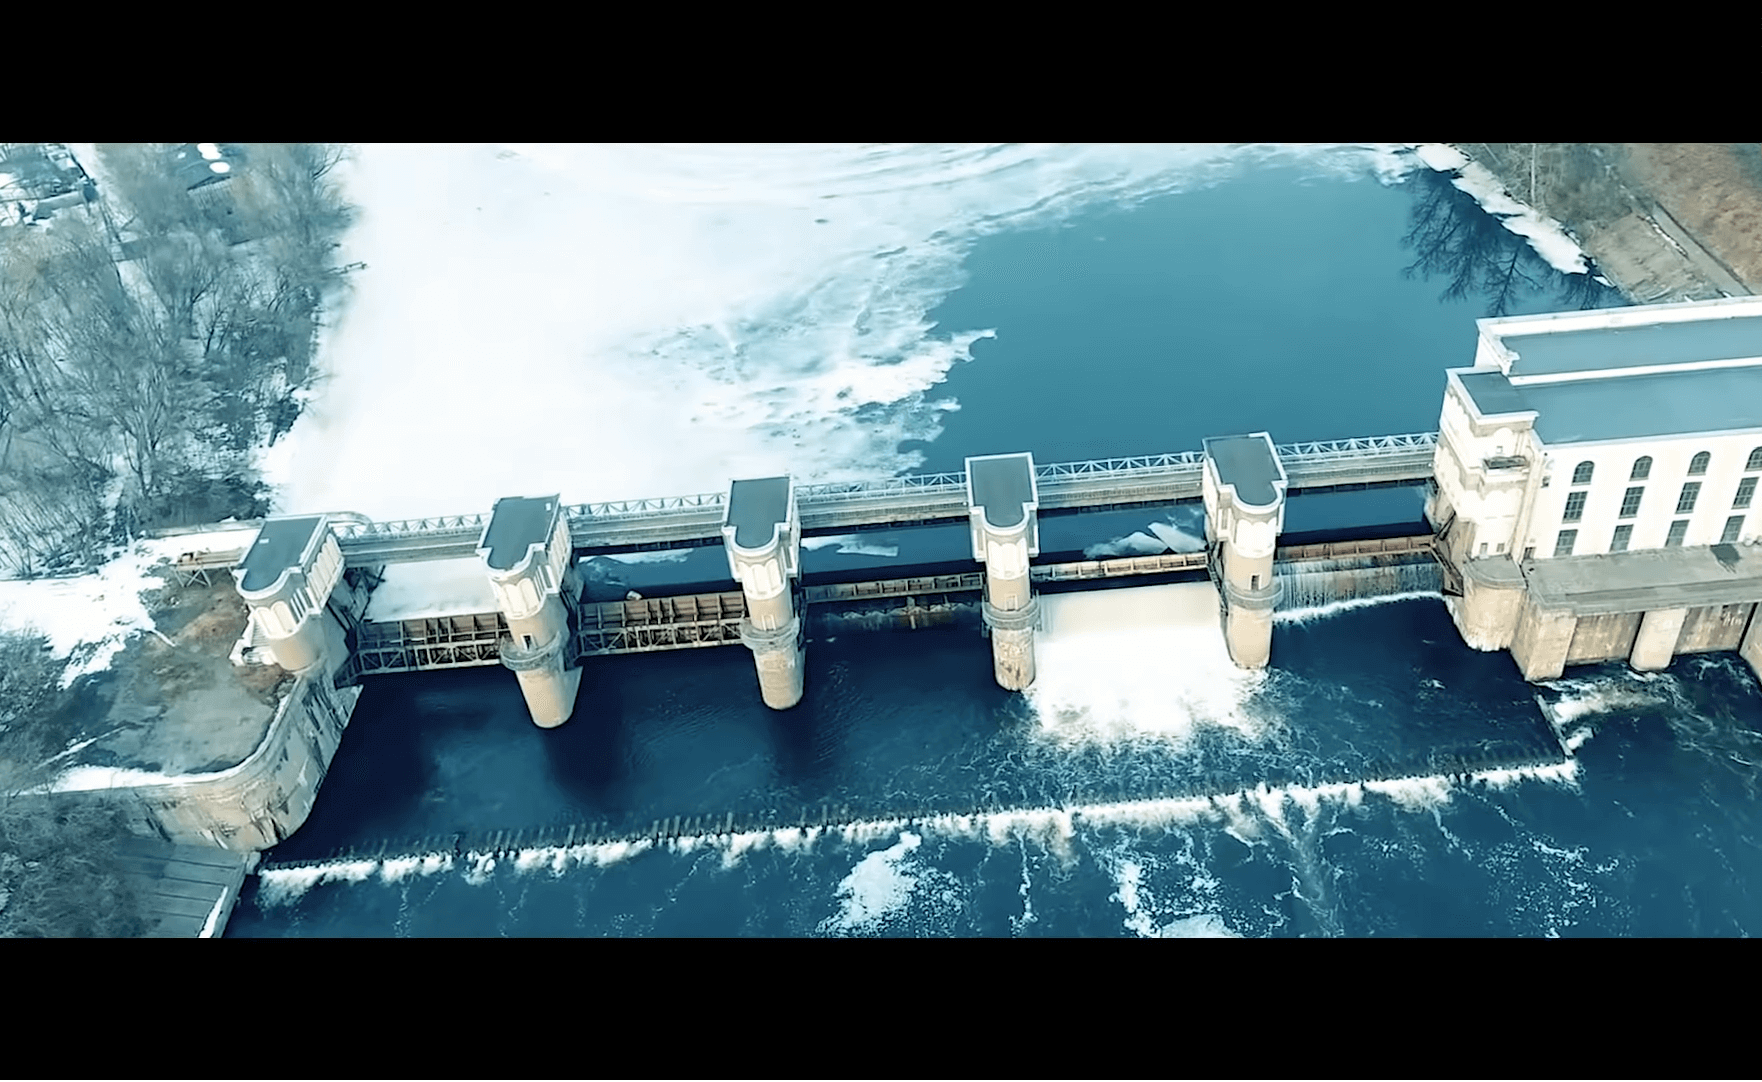 Dams producing electricity are now frozen and are not able to produce any power